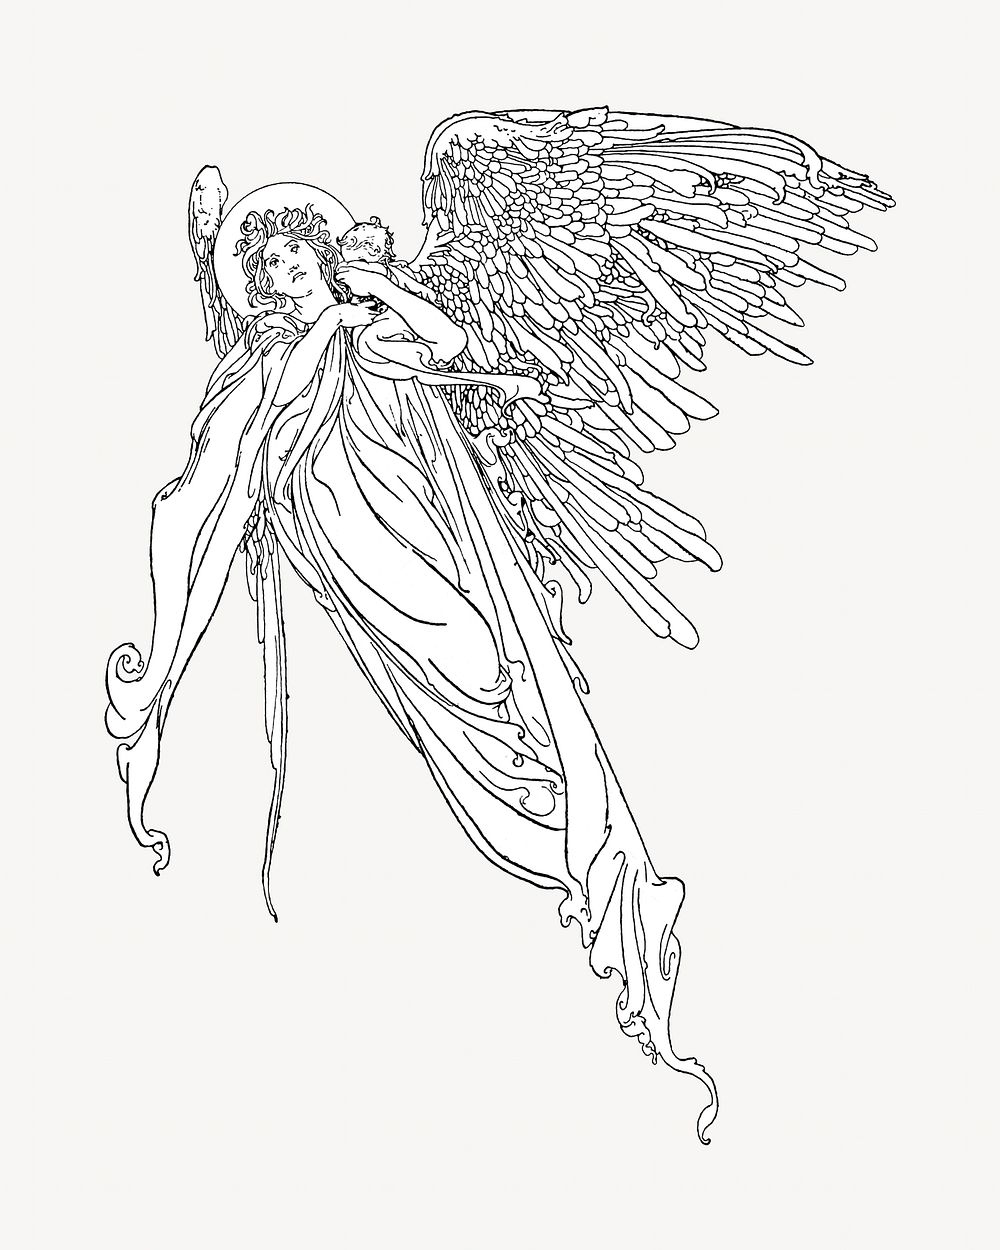 Angel vintage illustration. Remixed by rawpixel. 